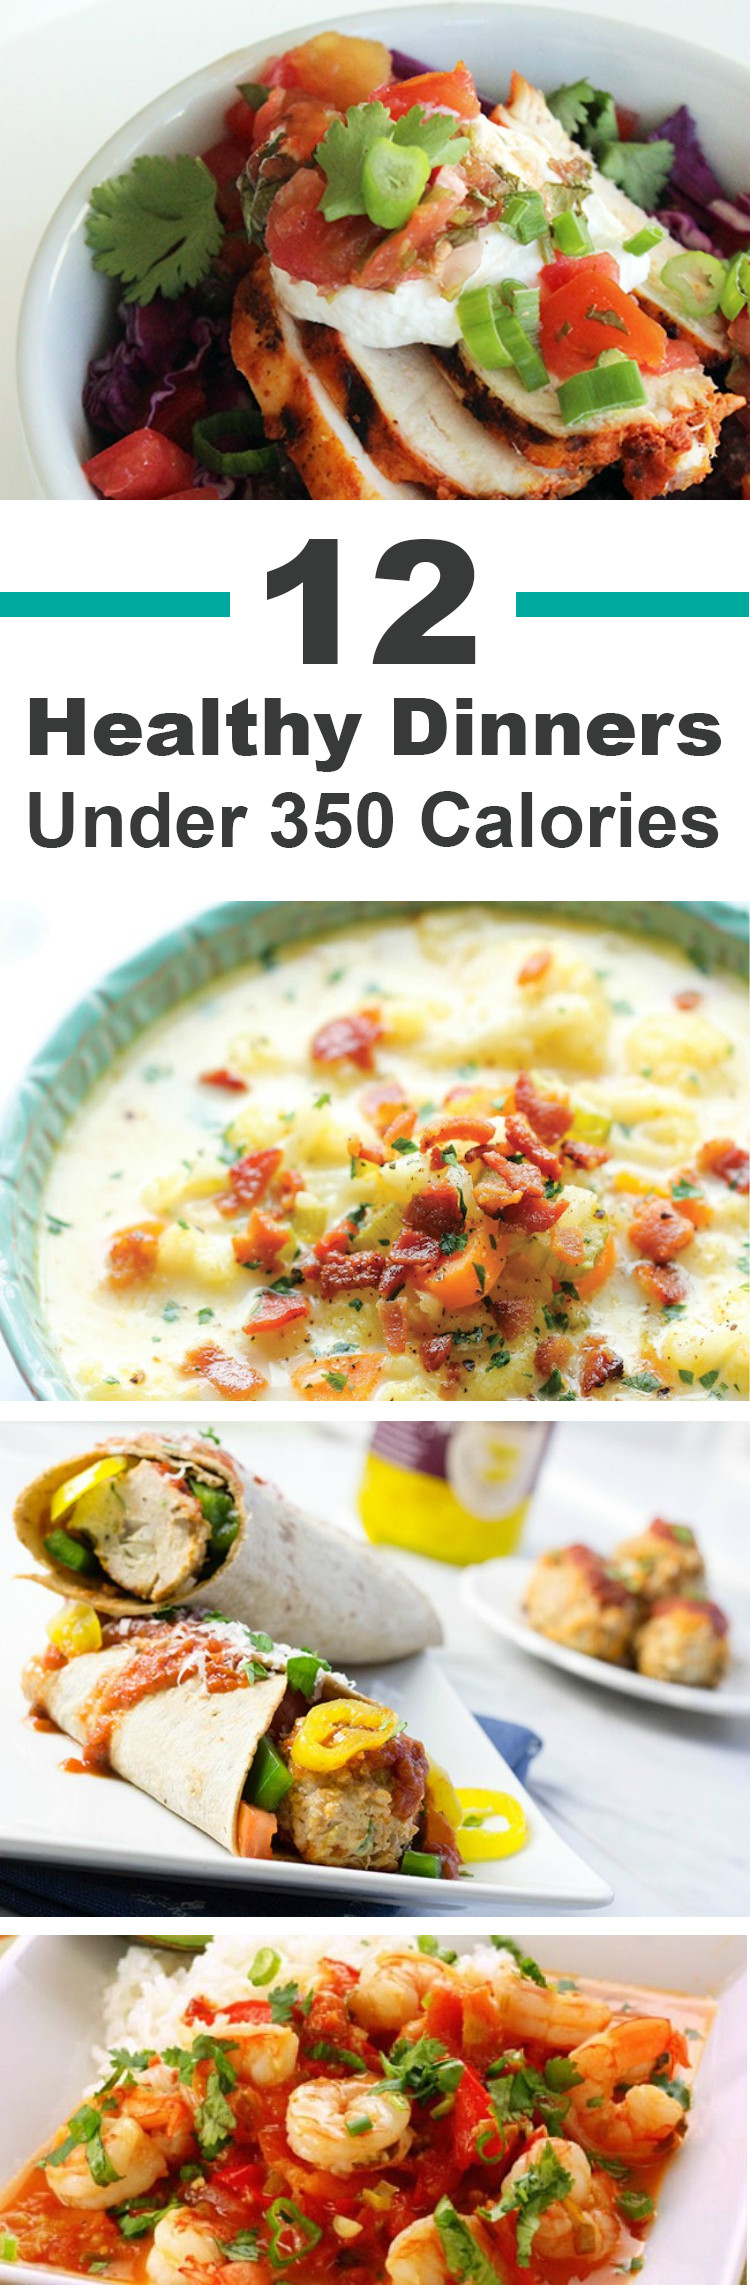 Low Calories Dinners
 12 Healthy Dinners Under 350 Calories